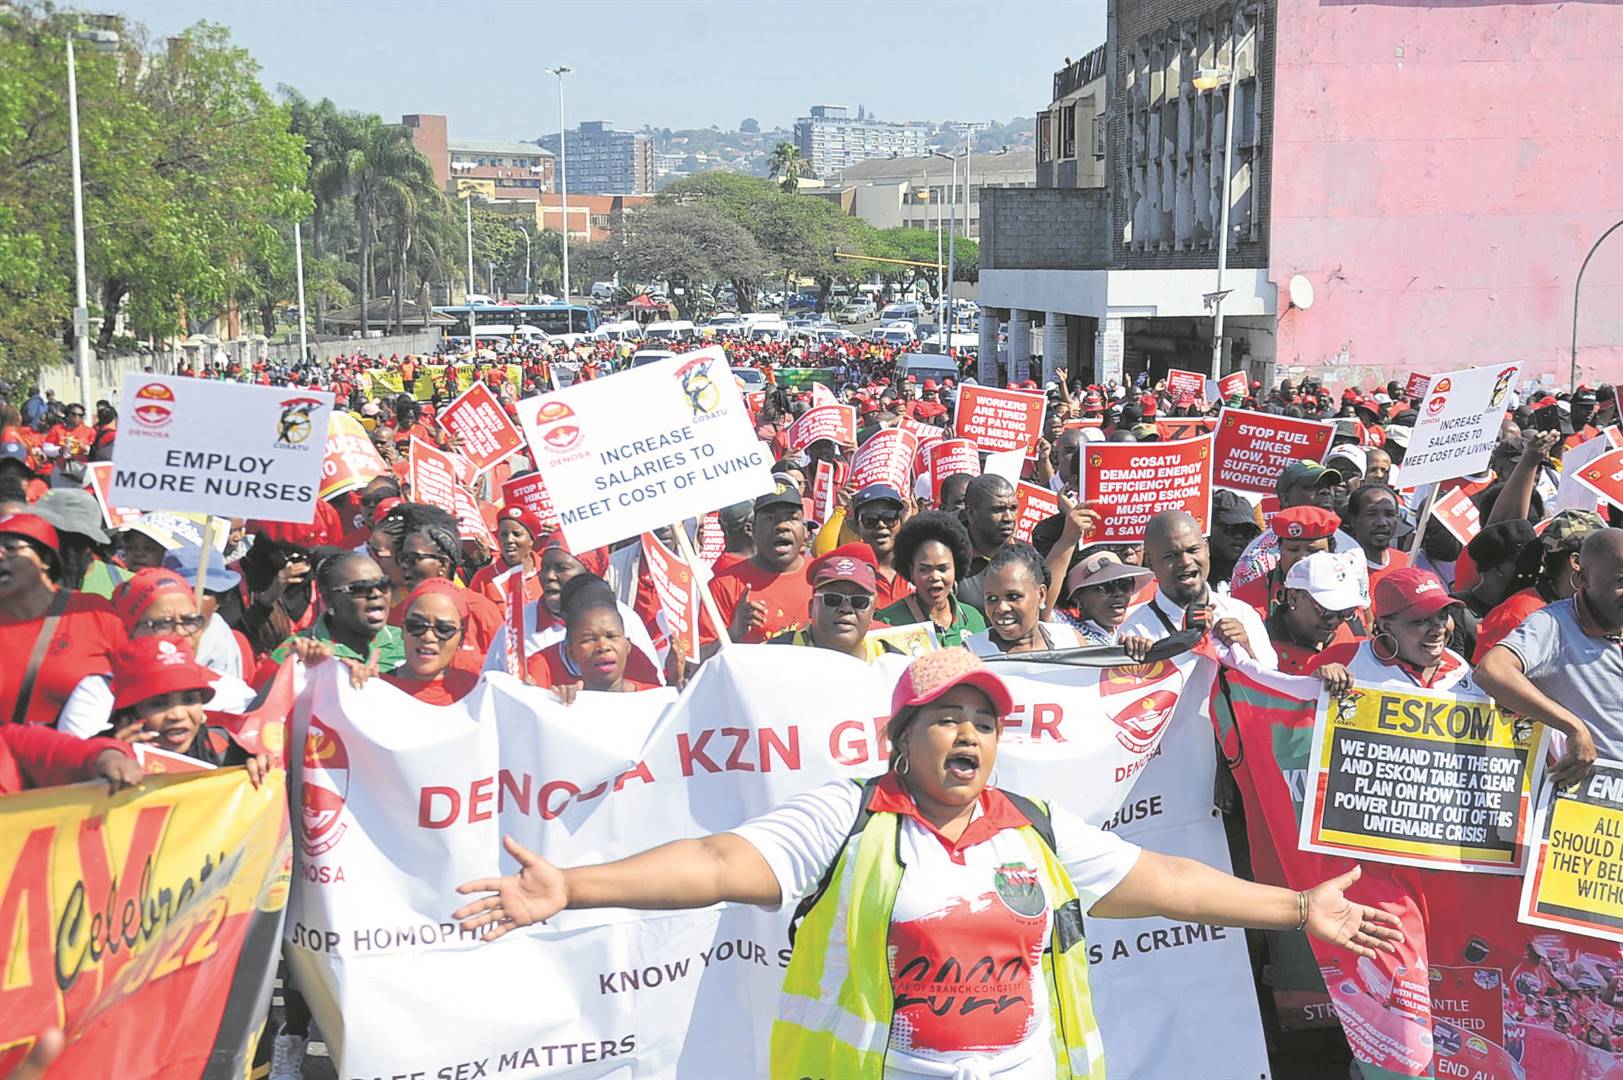 In KZN, Cosatu members painted the city red, demanding a better life for all. Photo by Jabulani Langa